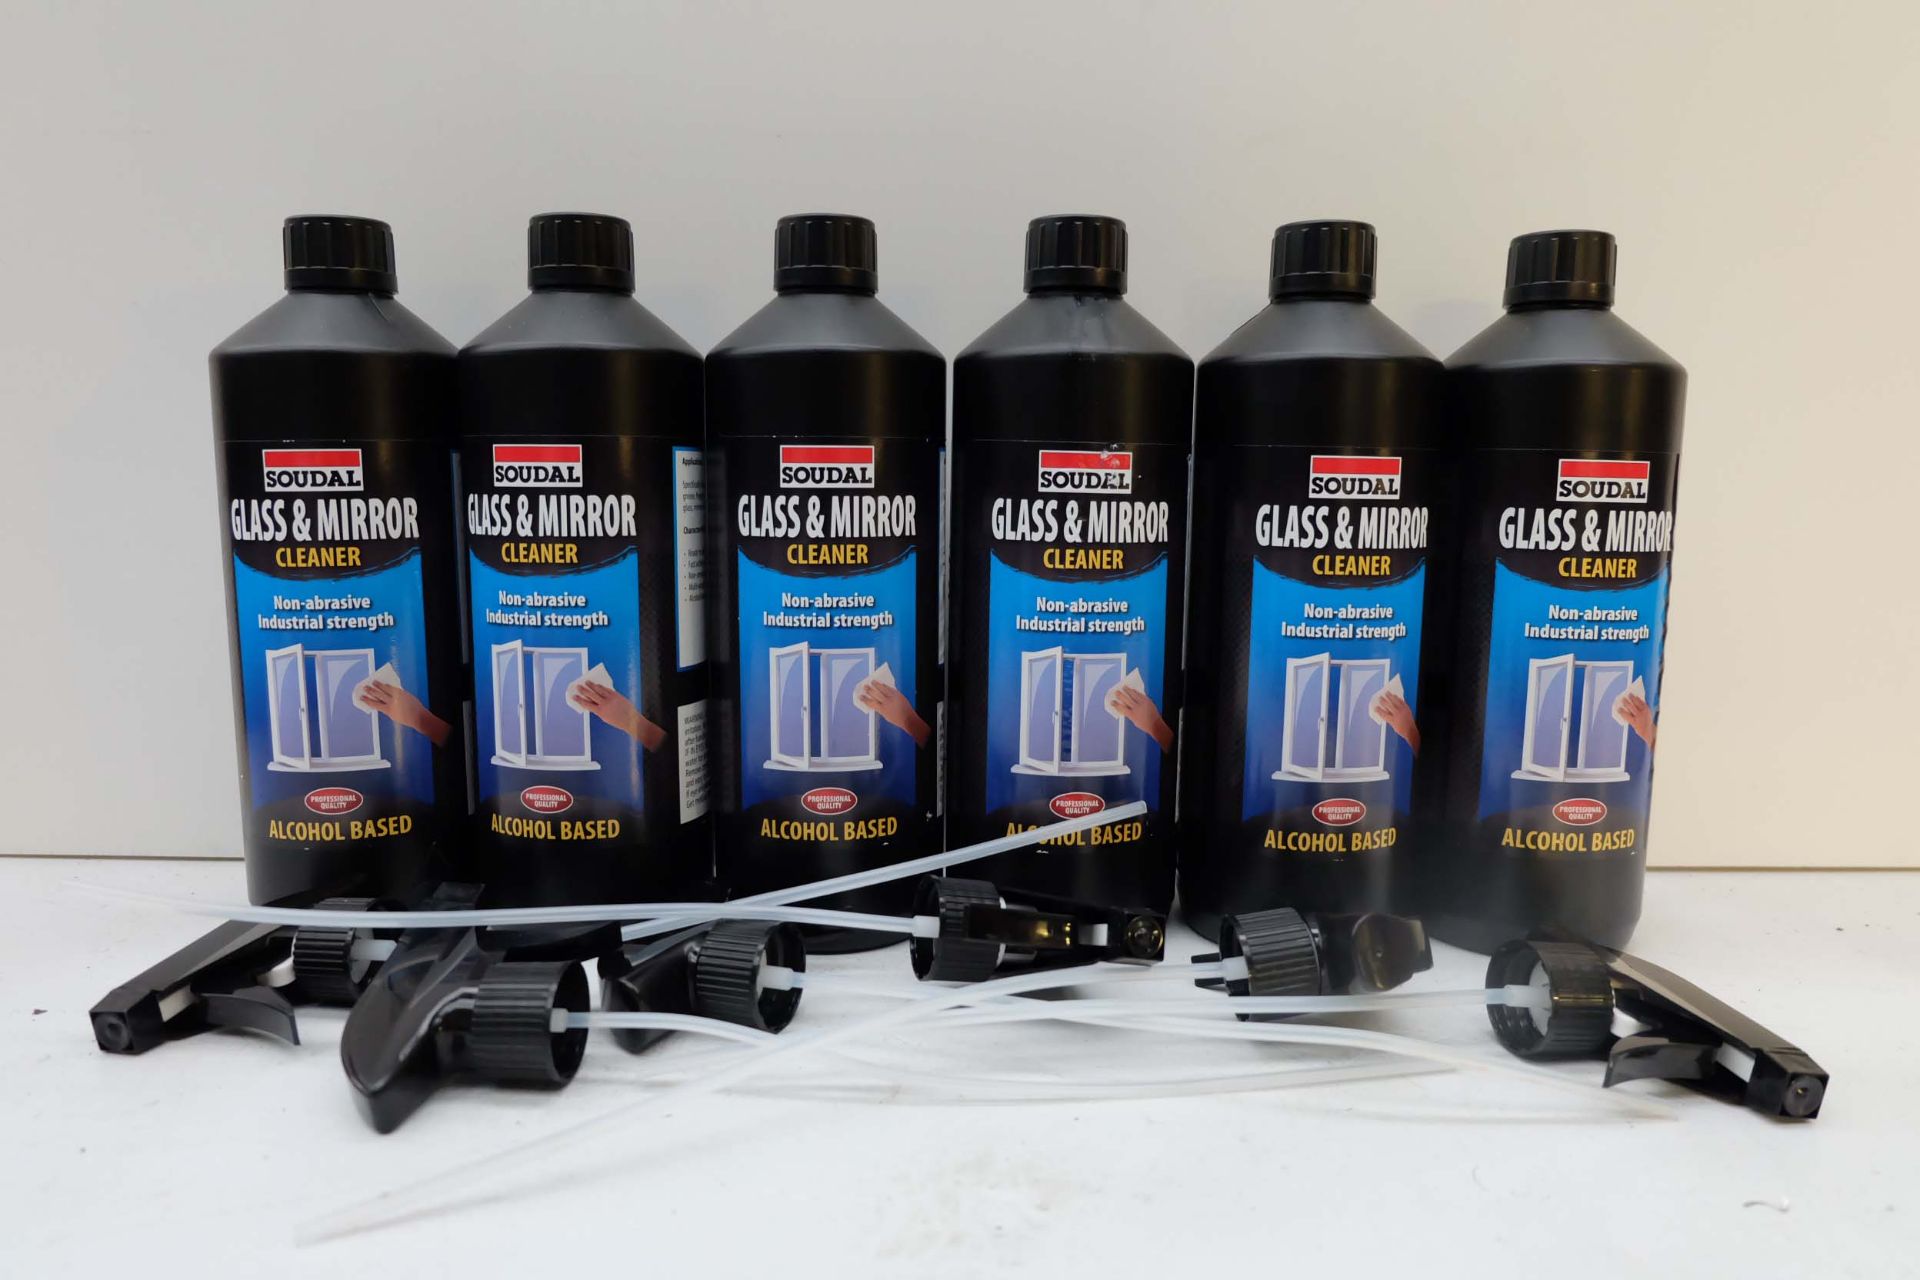 6 x 1 Ltr Bottle of Soudal Glass & Mirror Cleaner With Spray Nozzles.